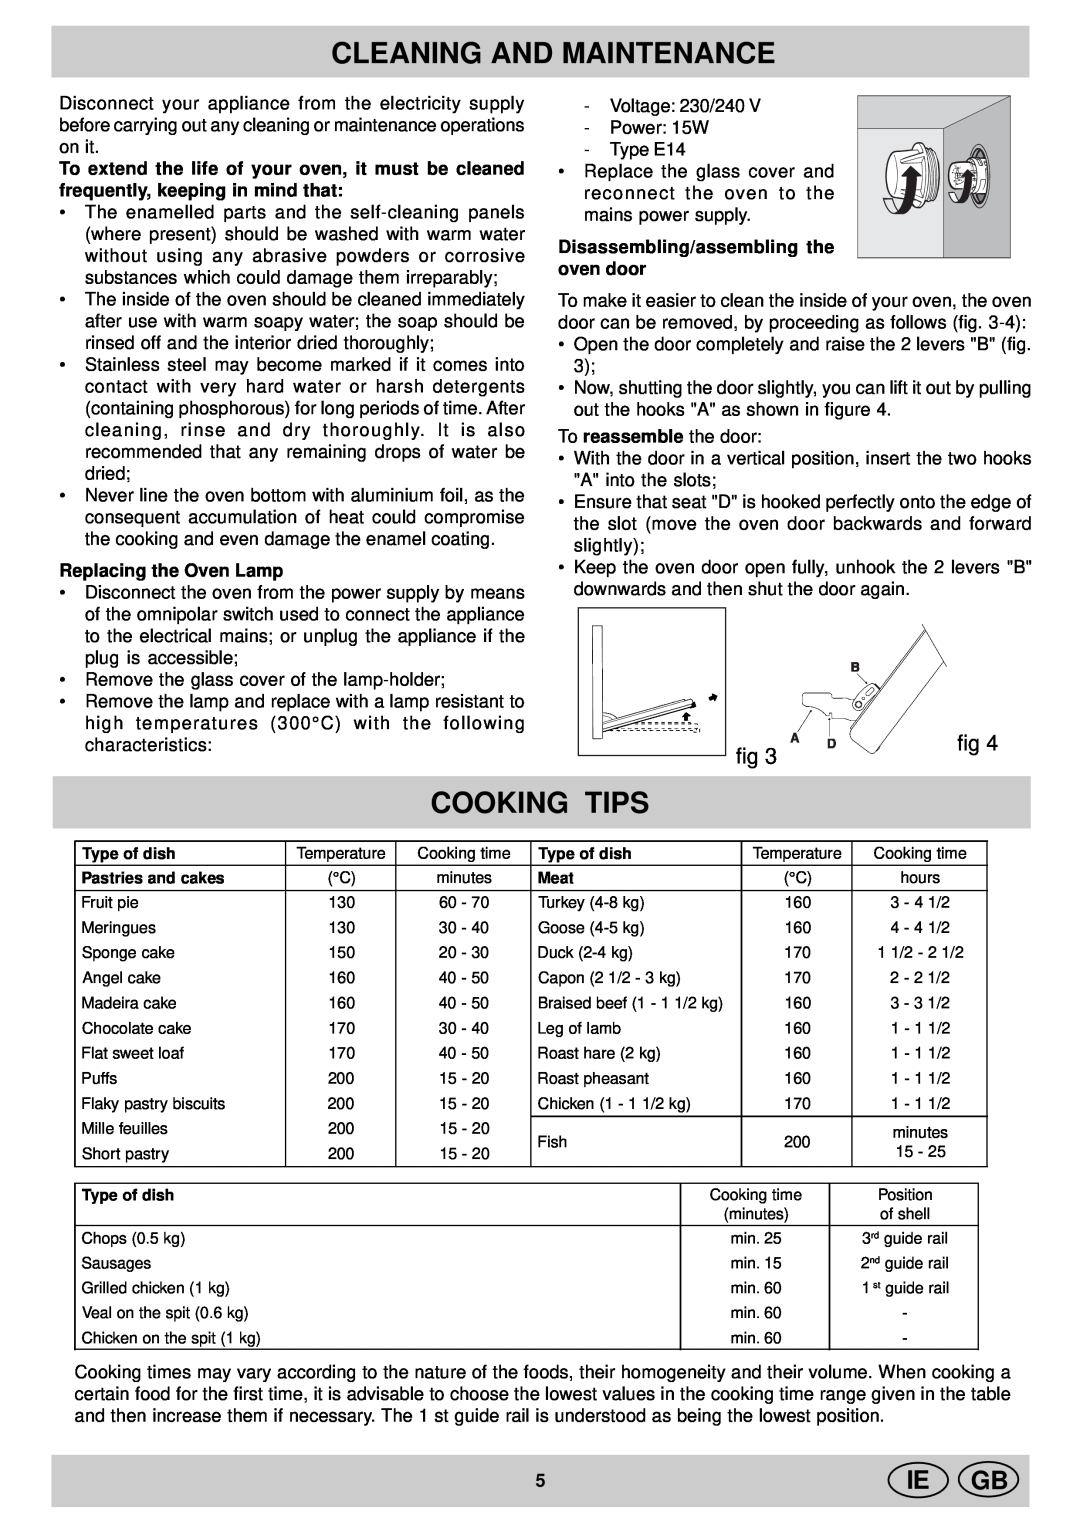 Indesit KP9507EB manual Cleaning And Maintenance, Cooking Tips, Ie Gb, Replacing the Oven Lamp 